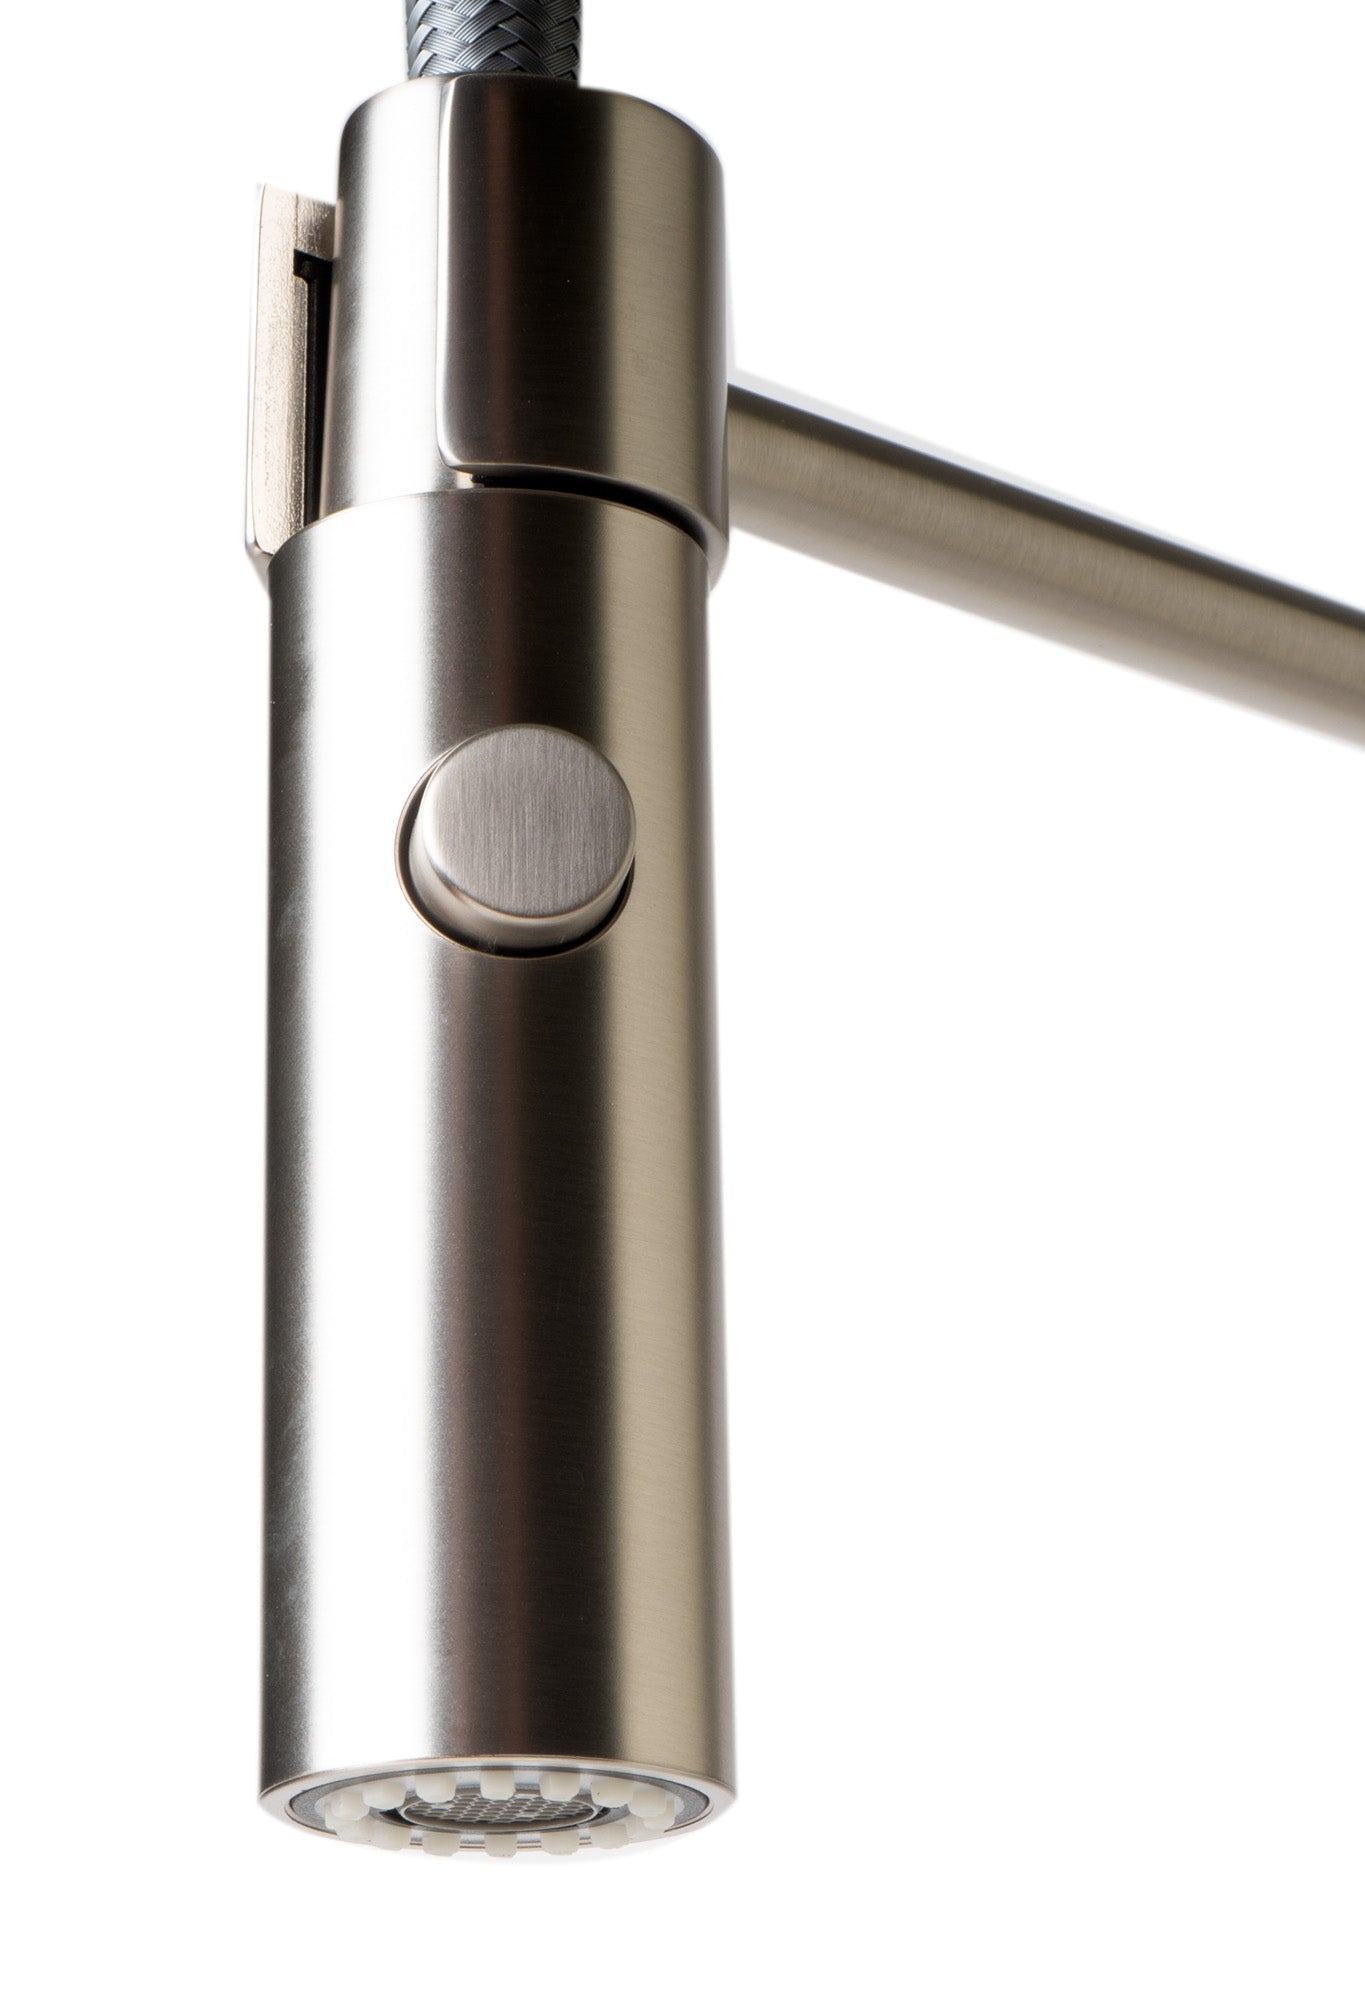 Alfi Brushed Nickel Commercial Spring Kitchen Faucet - ABKF3732